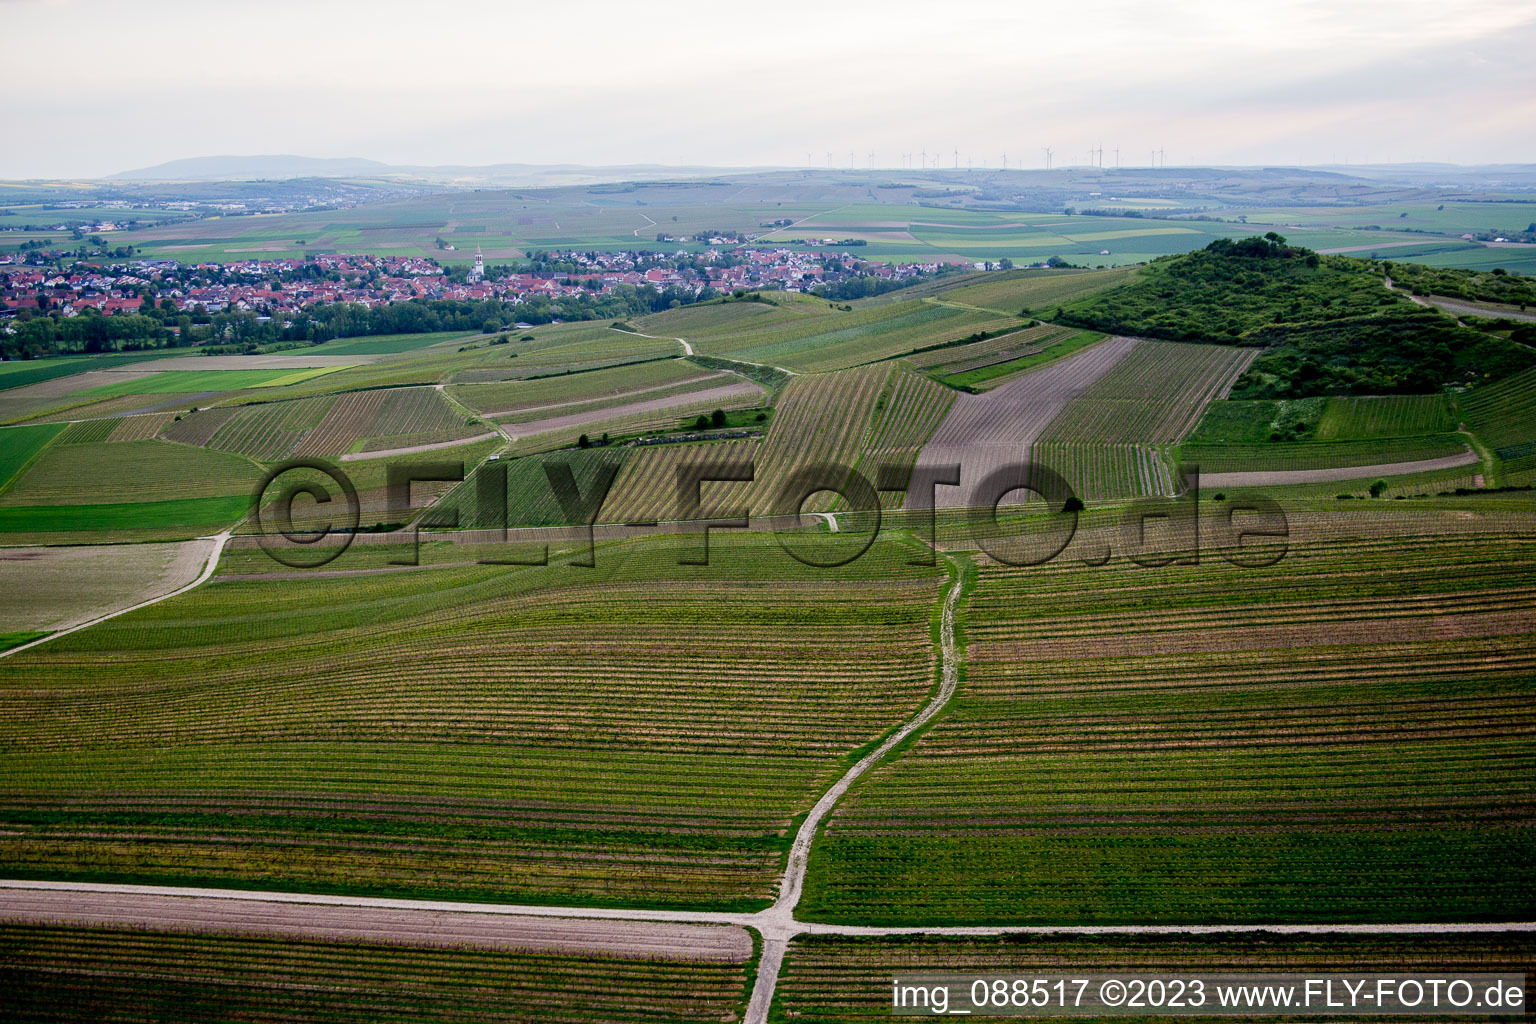 Bechtolsheim in the state Rhineland-Palatinate, Germany from above